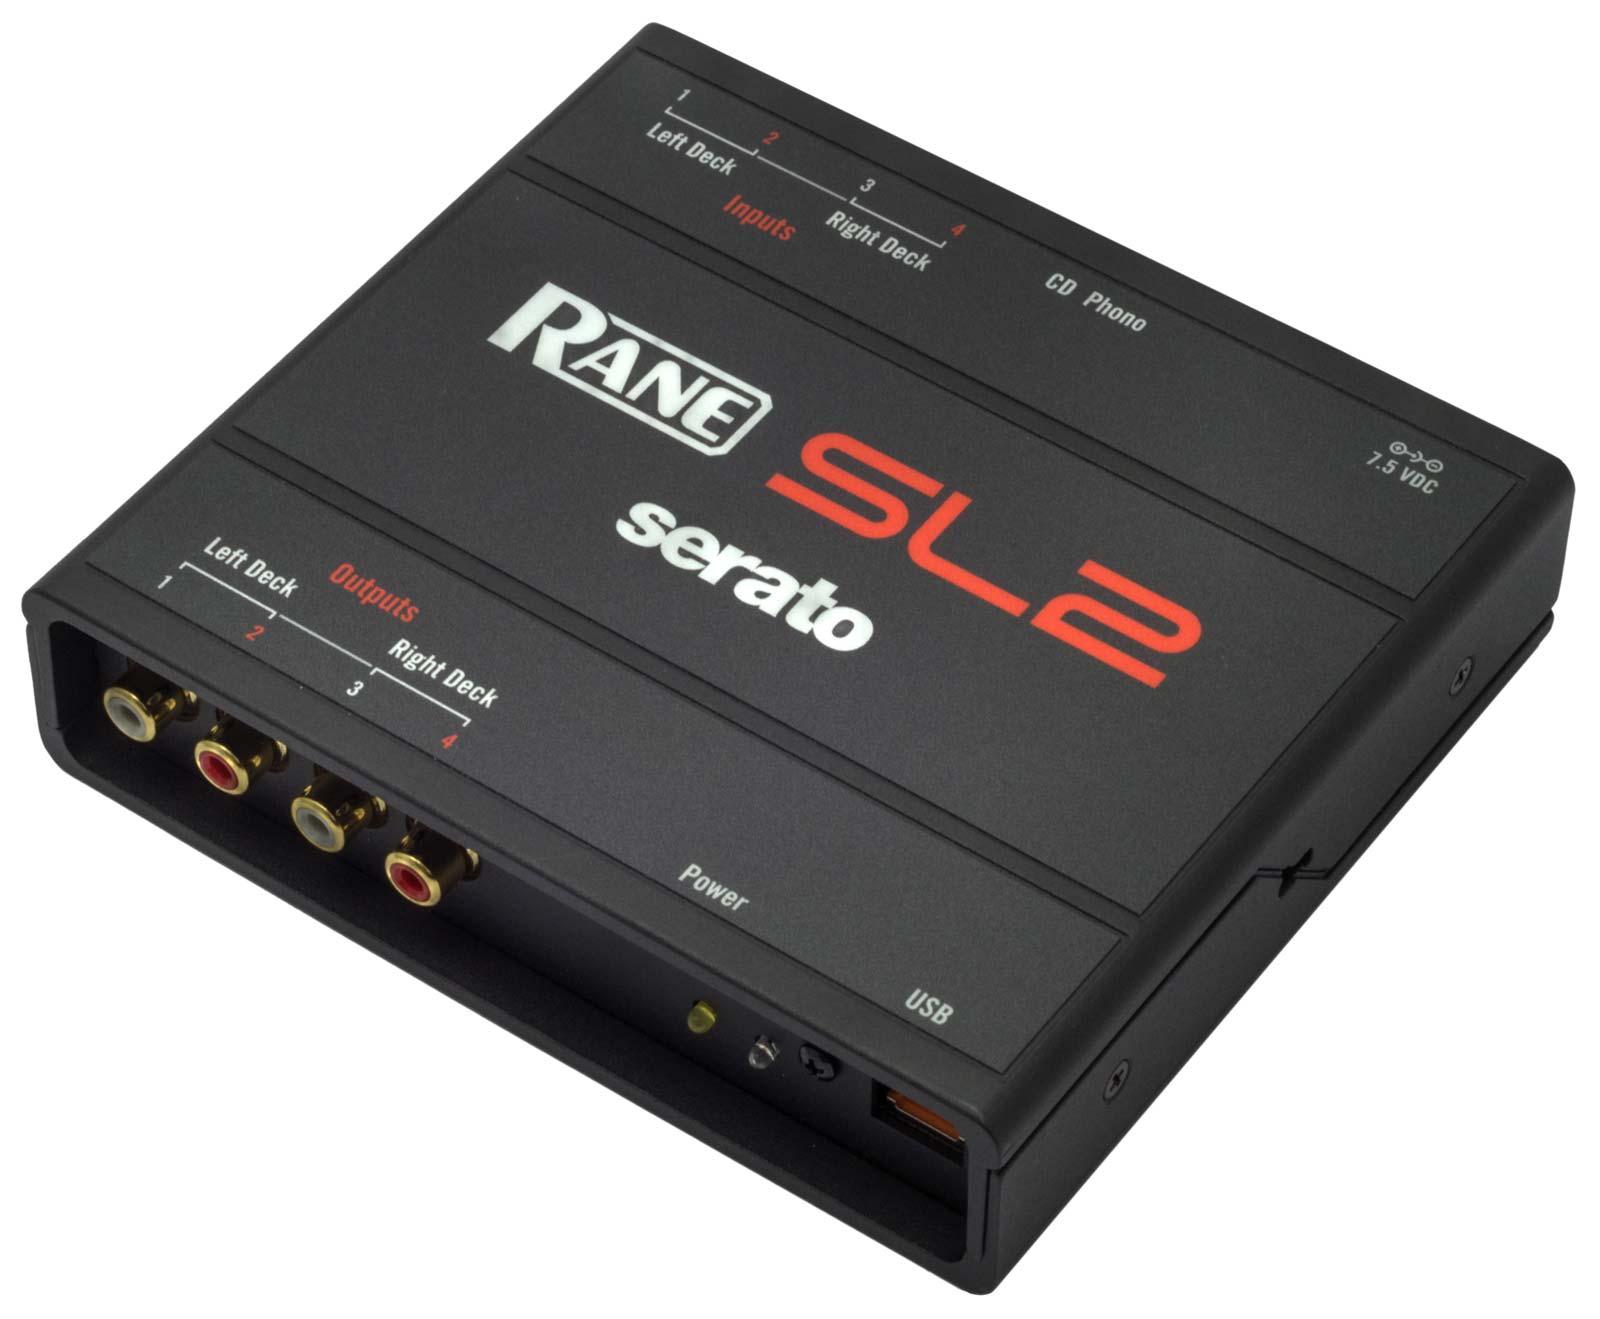 serato scratch live system requirements